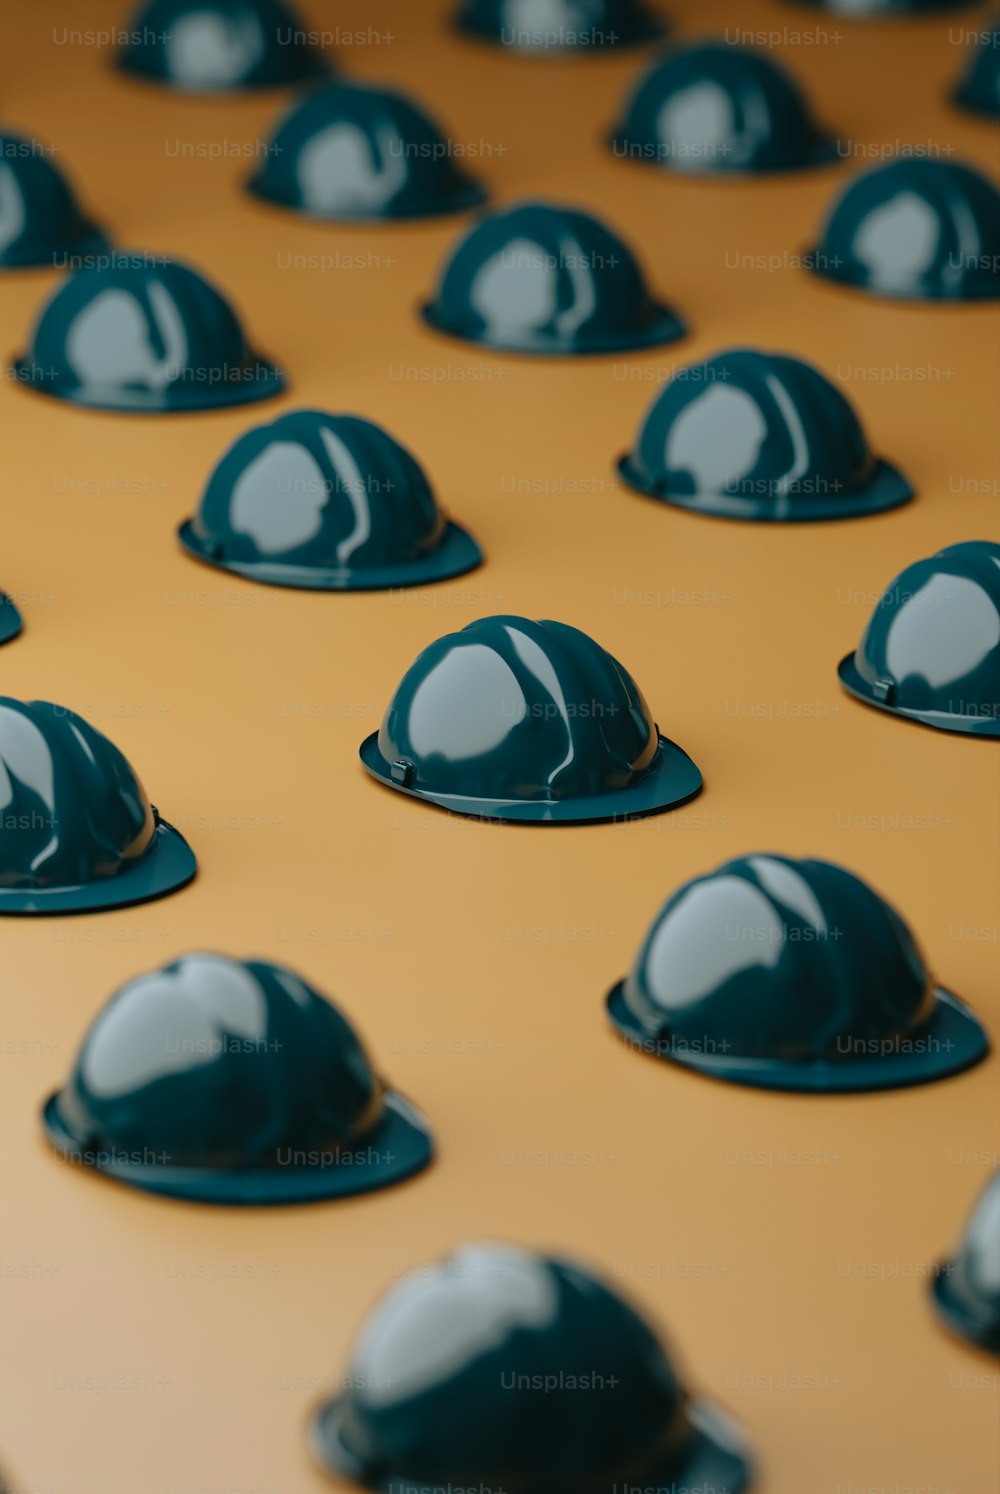 a group of hard hats sitting on top of a table